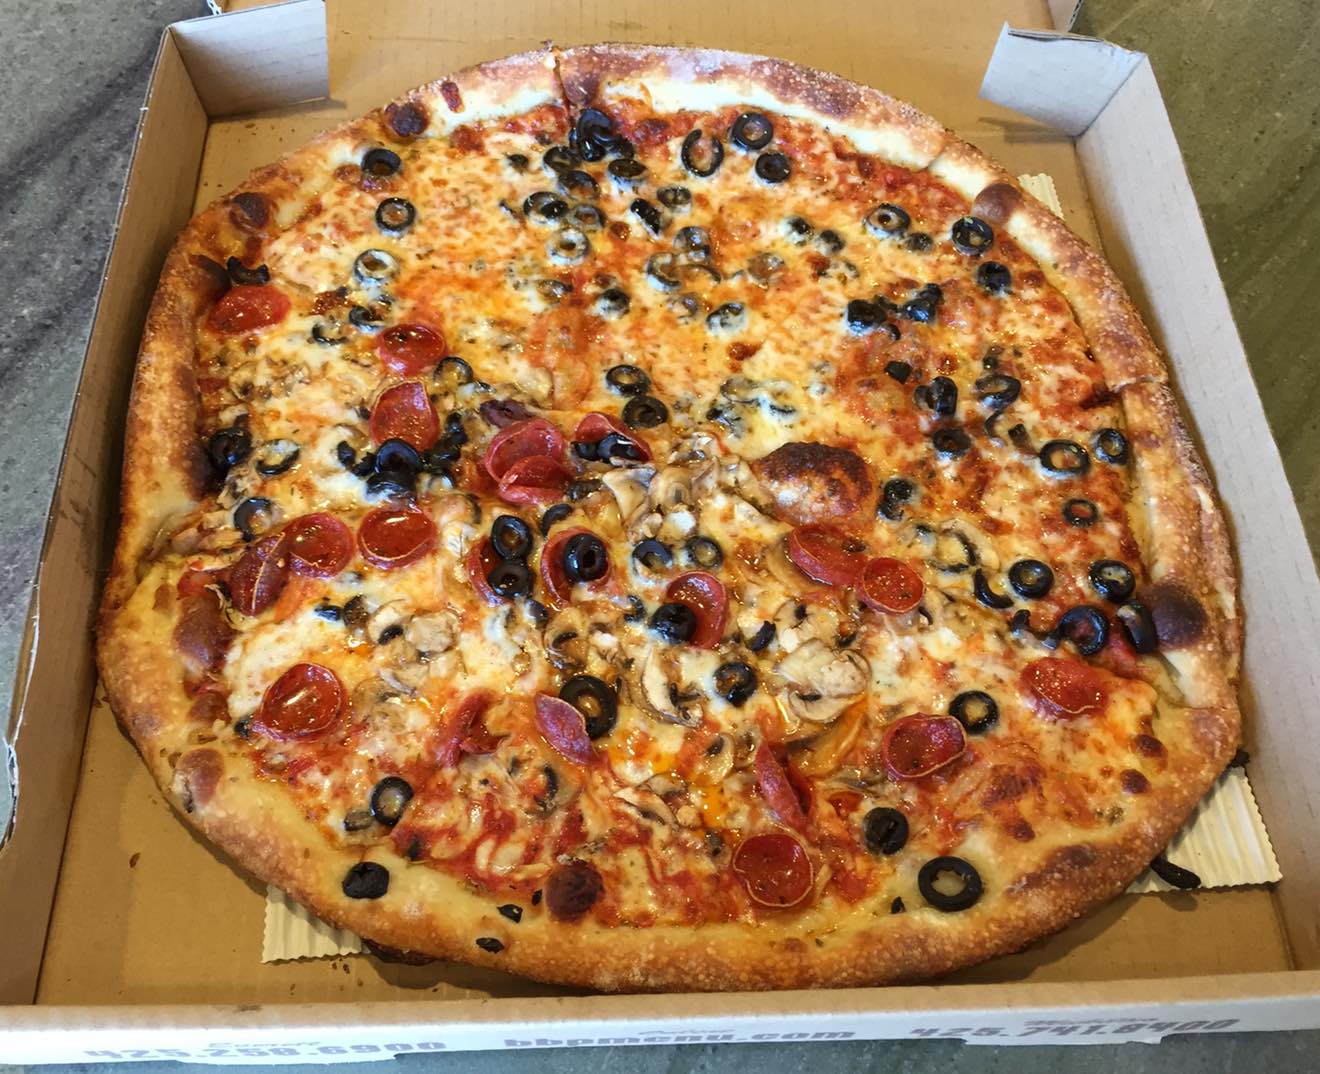 14 inch black olive, half pepperoni and mushroom.  Purchased and consumed April 12th, 2015